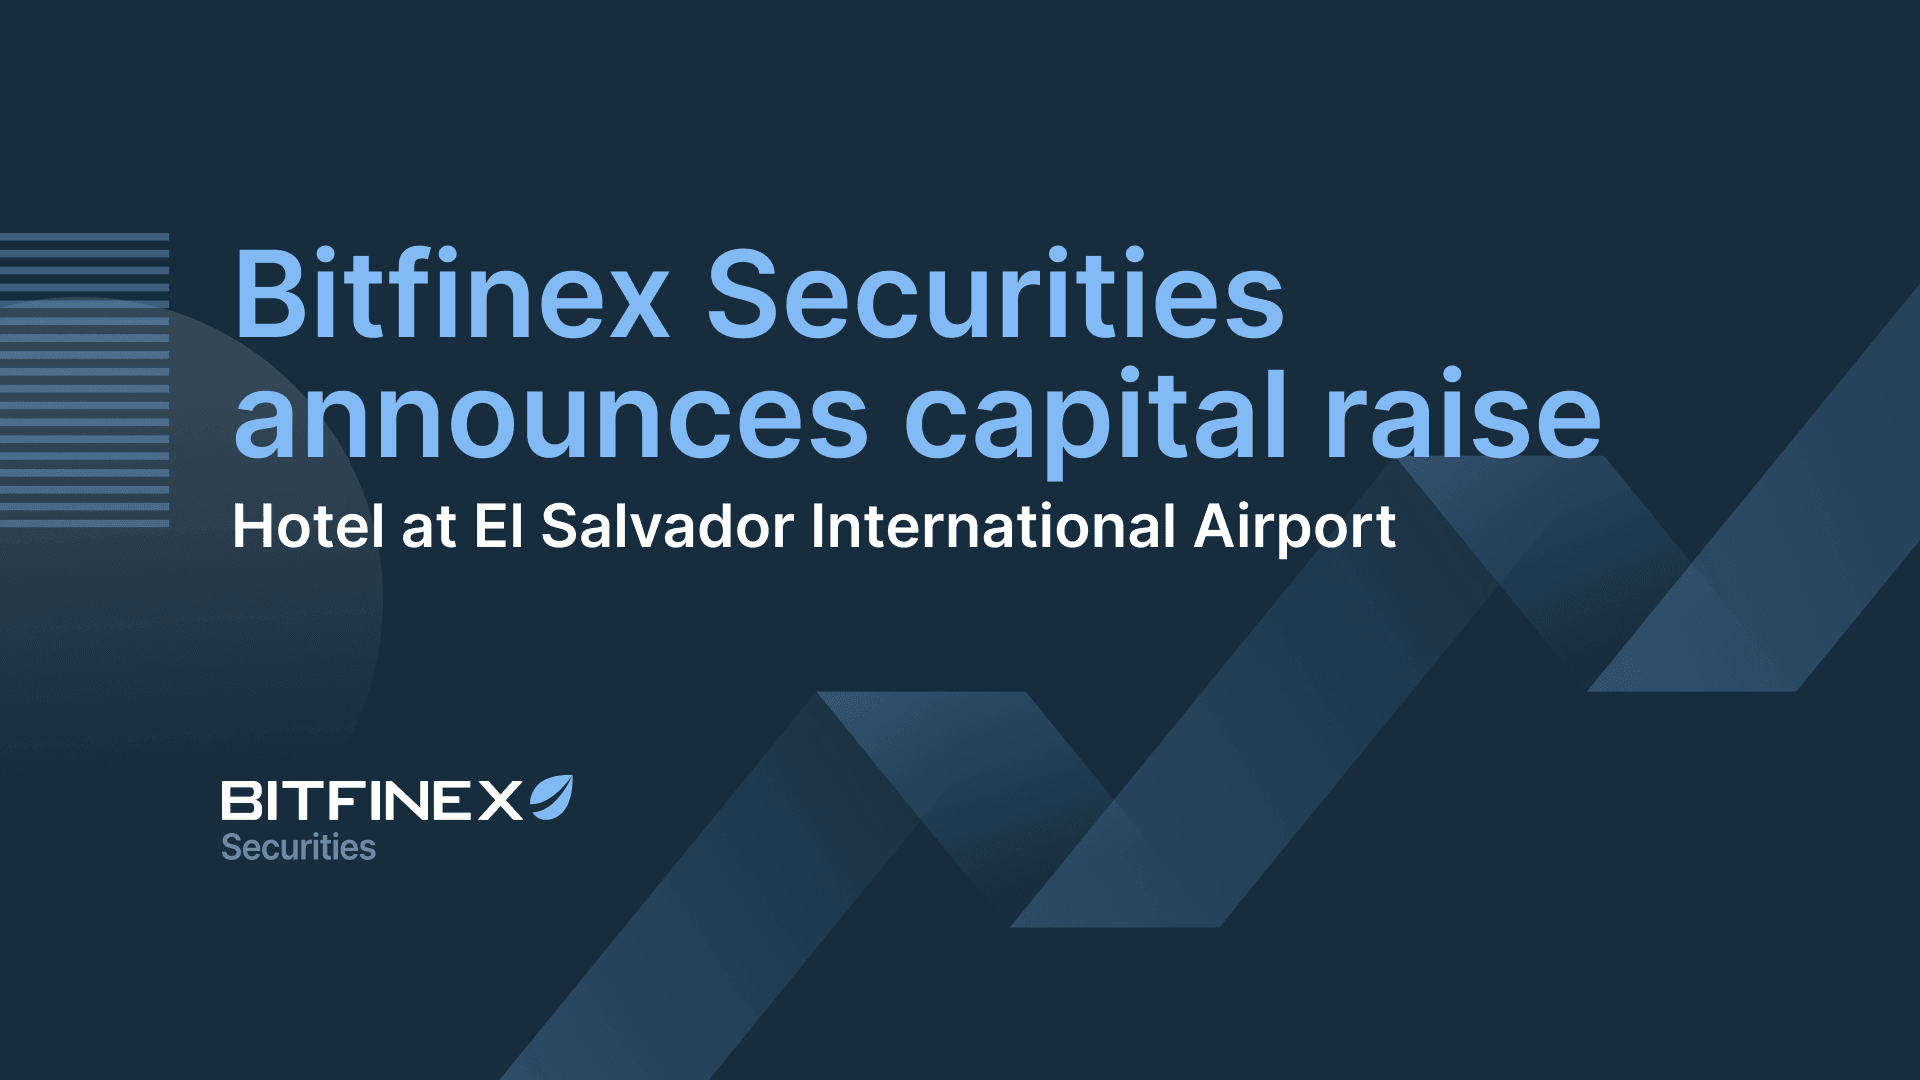 Bitfinex Securities Announces New Capital Raise for the First Hotel at El Salvador International Airport